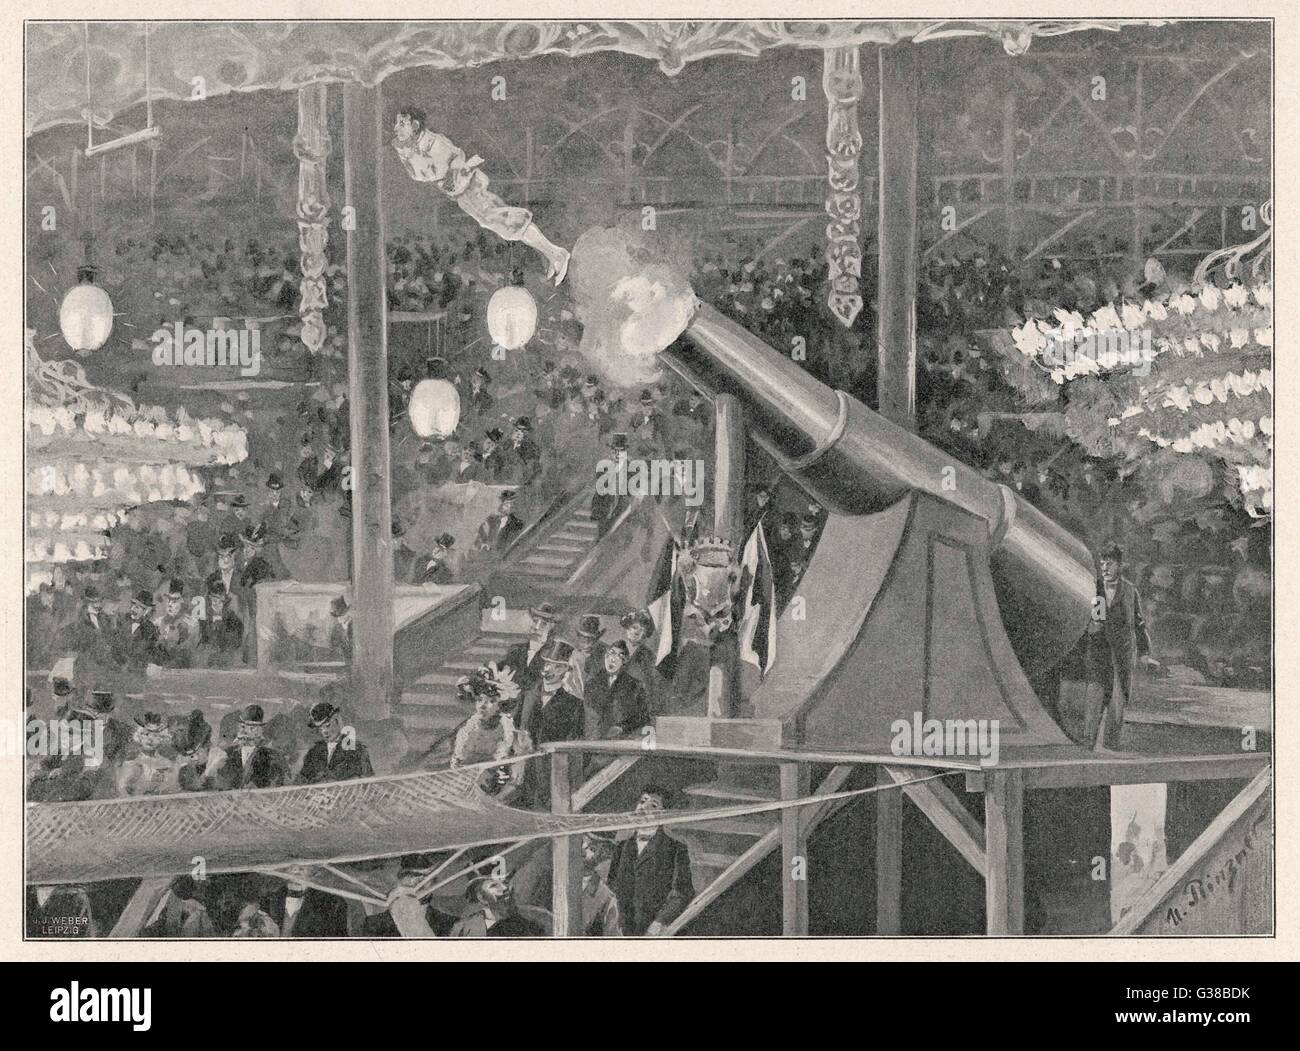 At the Circus Busch, a 'human  cannonball' is seemingly shot  from a gun       Date: 1905 Stock Photo